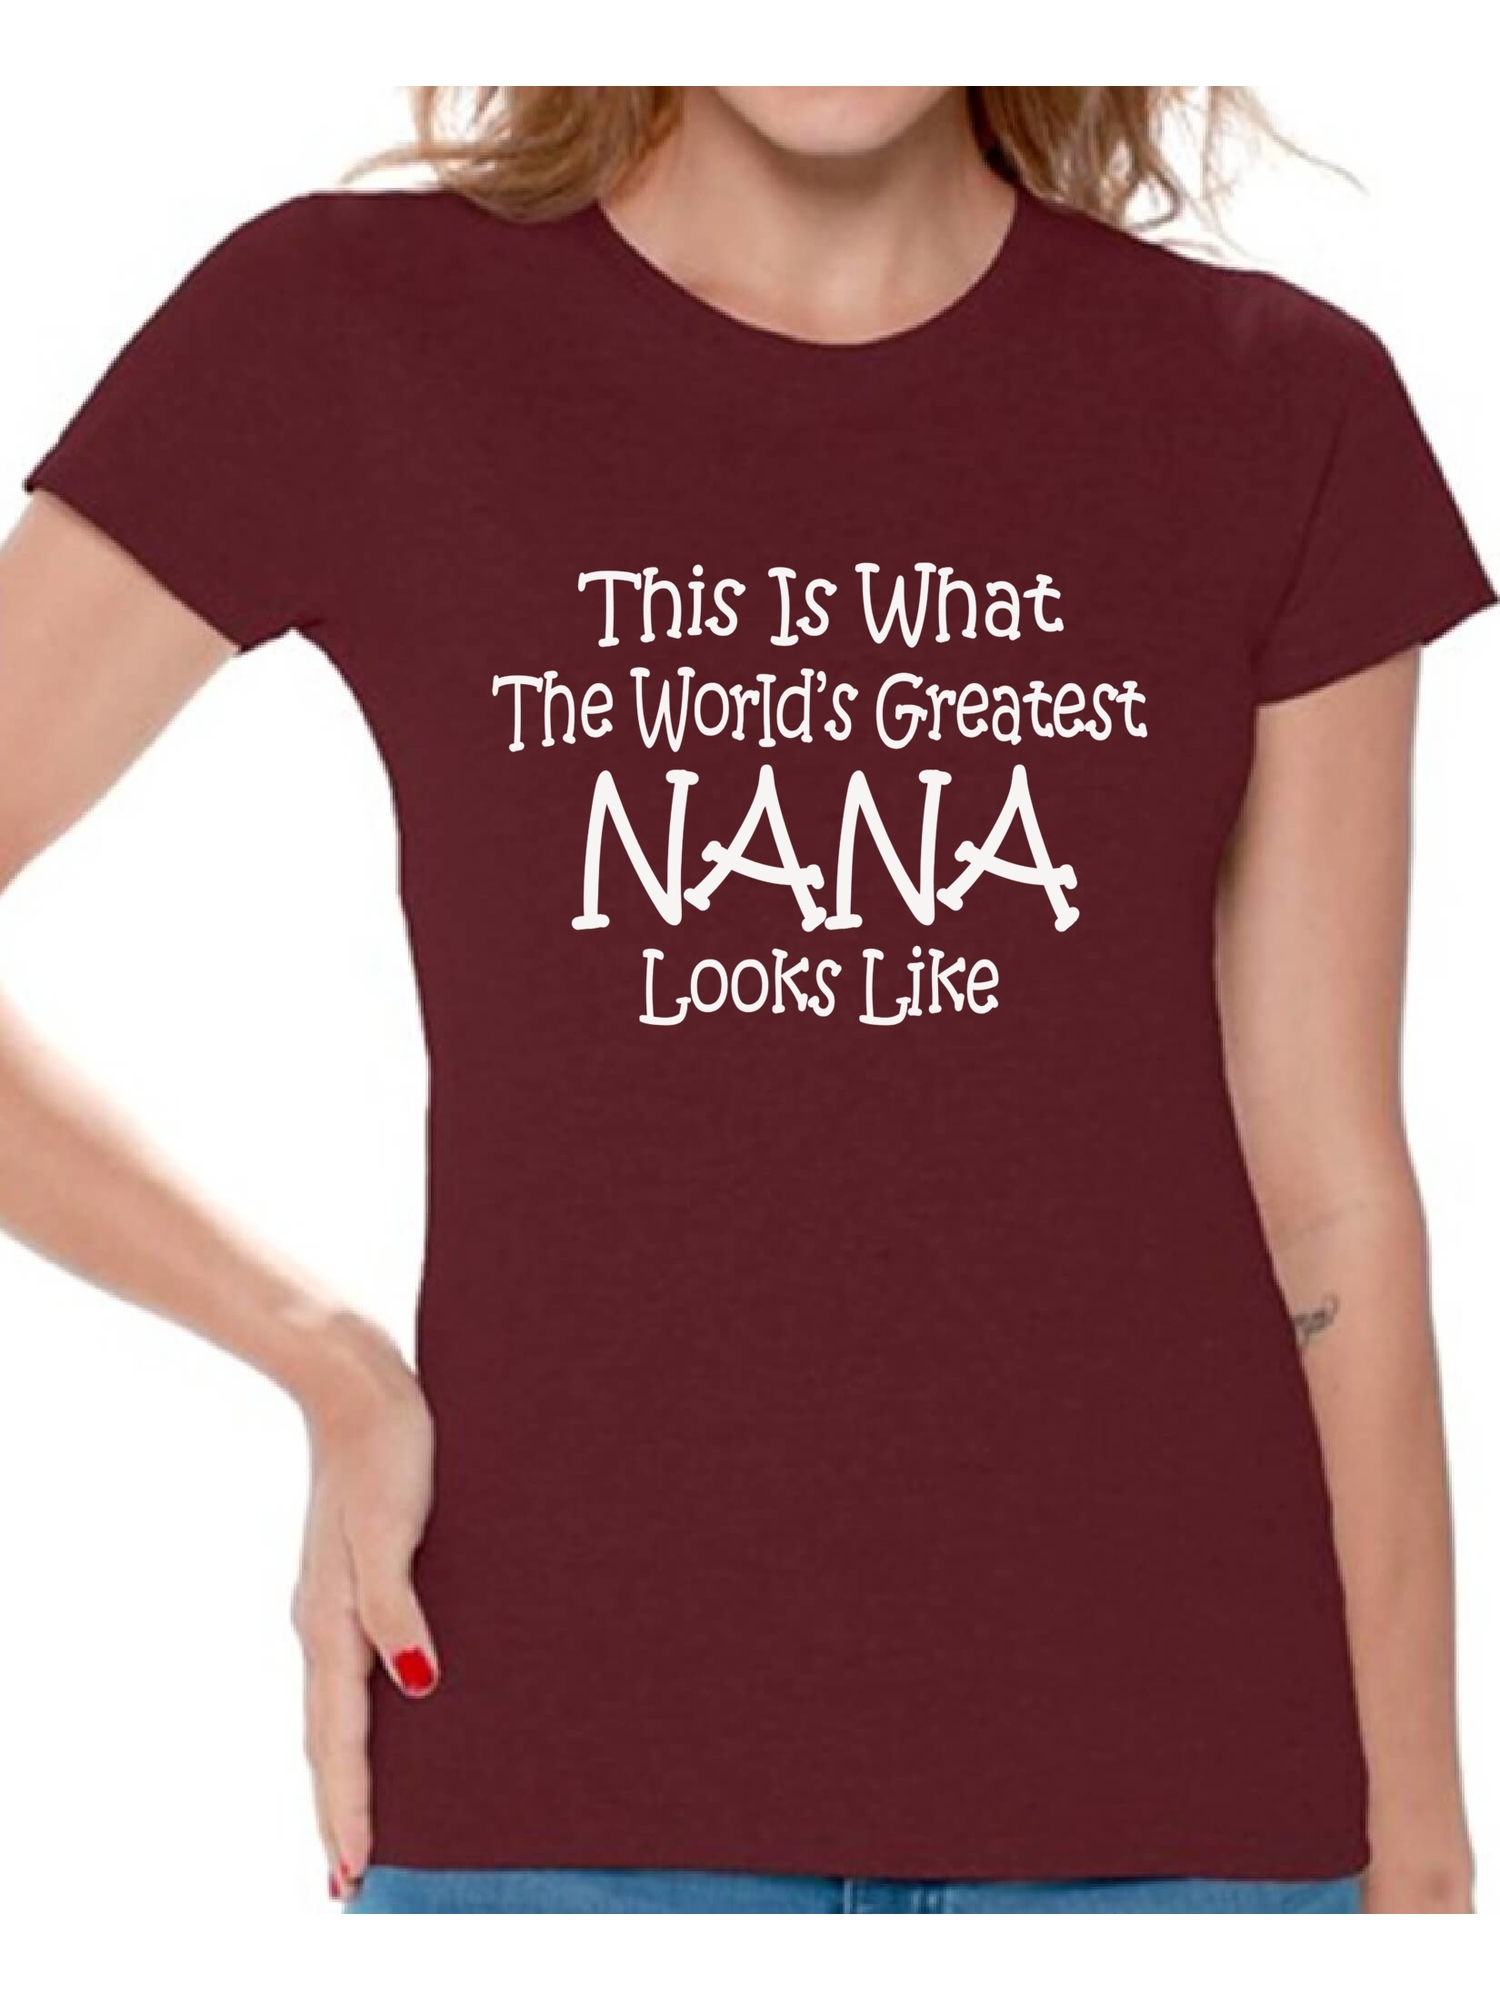 Awkward Styles Women's This Is What The World`s Greatest Nana Looks Like Graphic T-shirt Tops - image 1 of 4